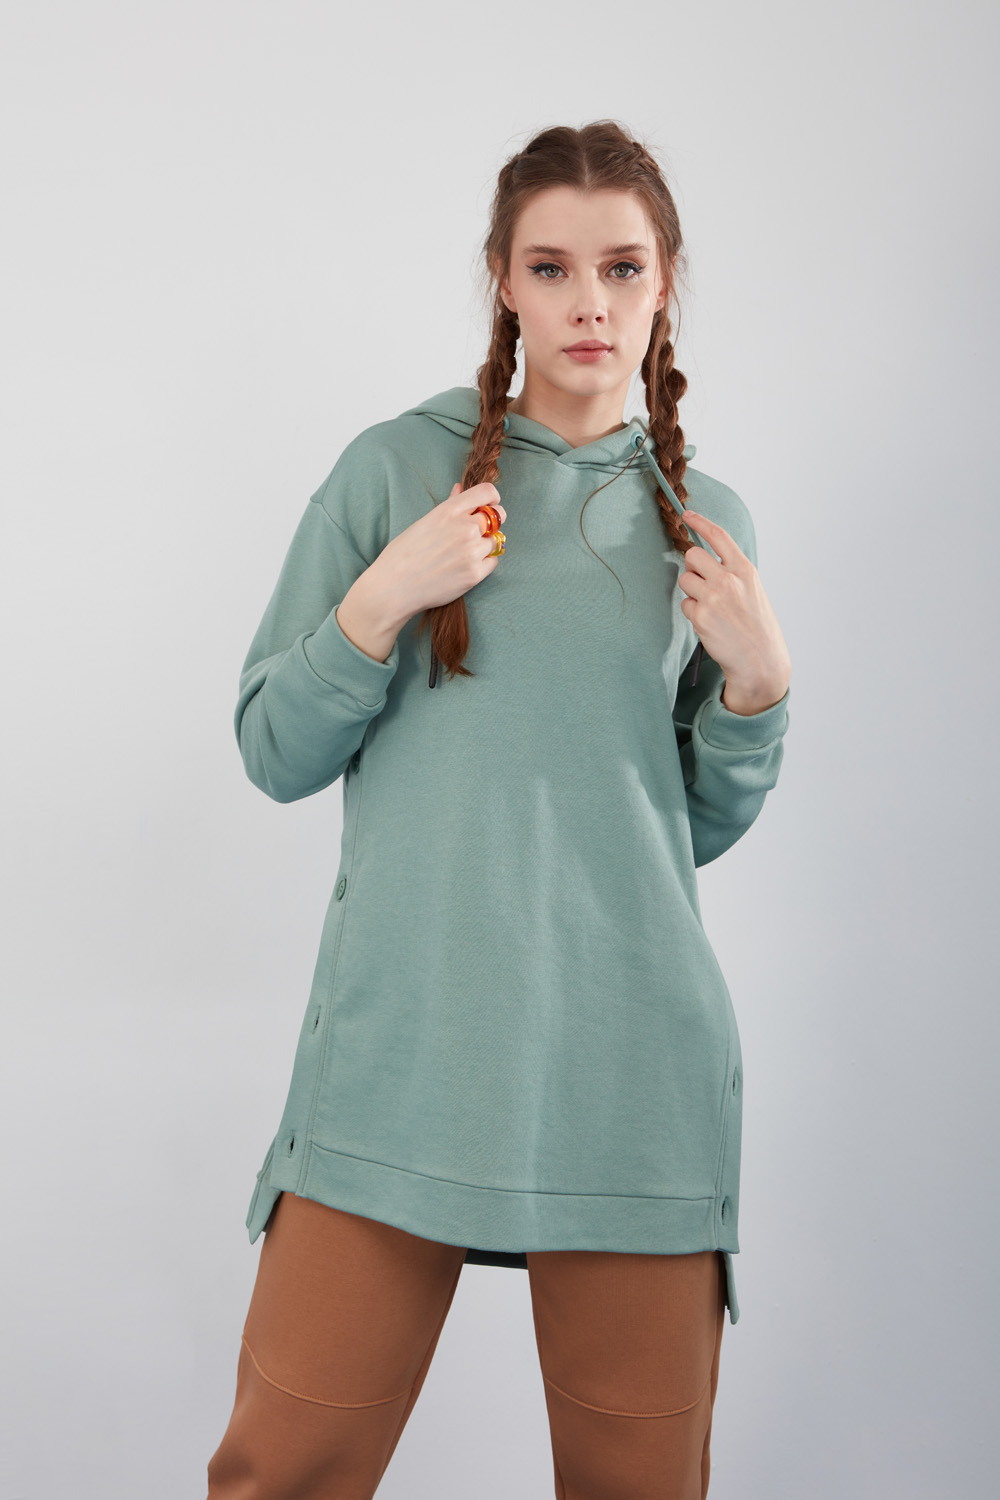 Mint Hooded Sweatshirt with Side Buttons